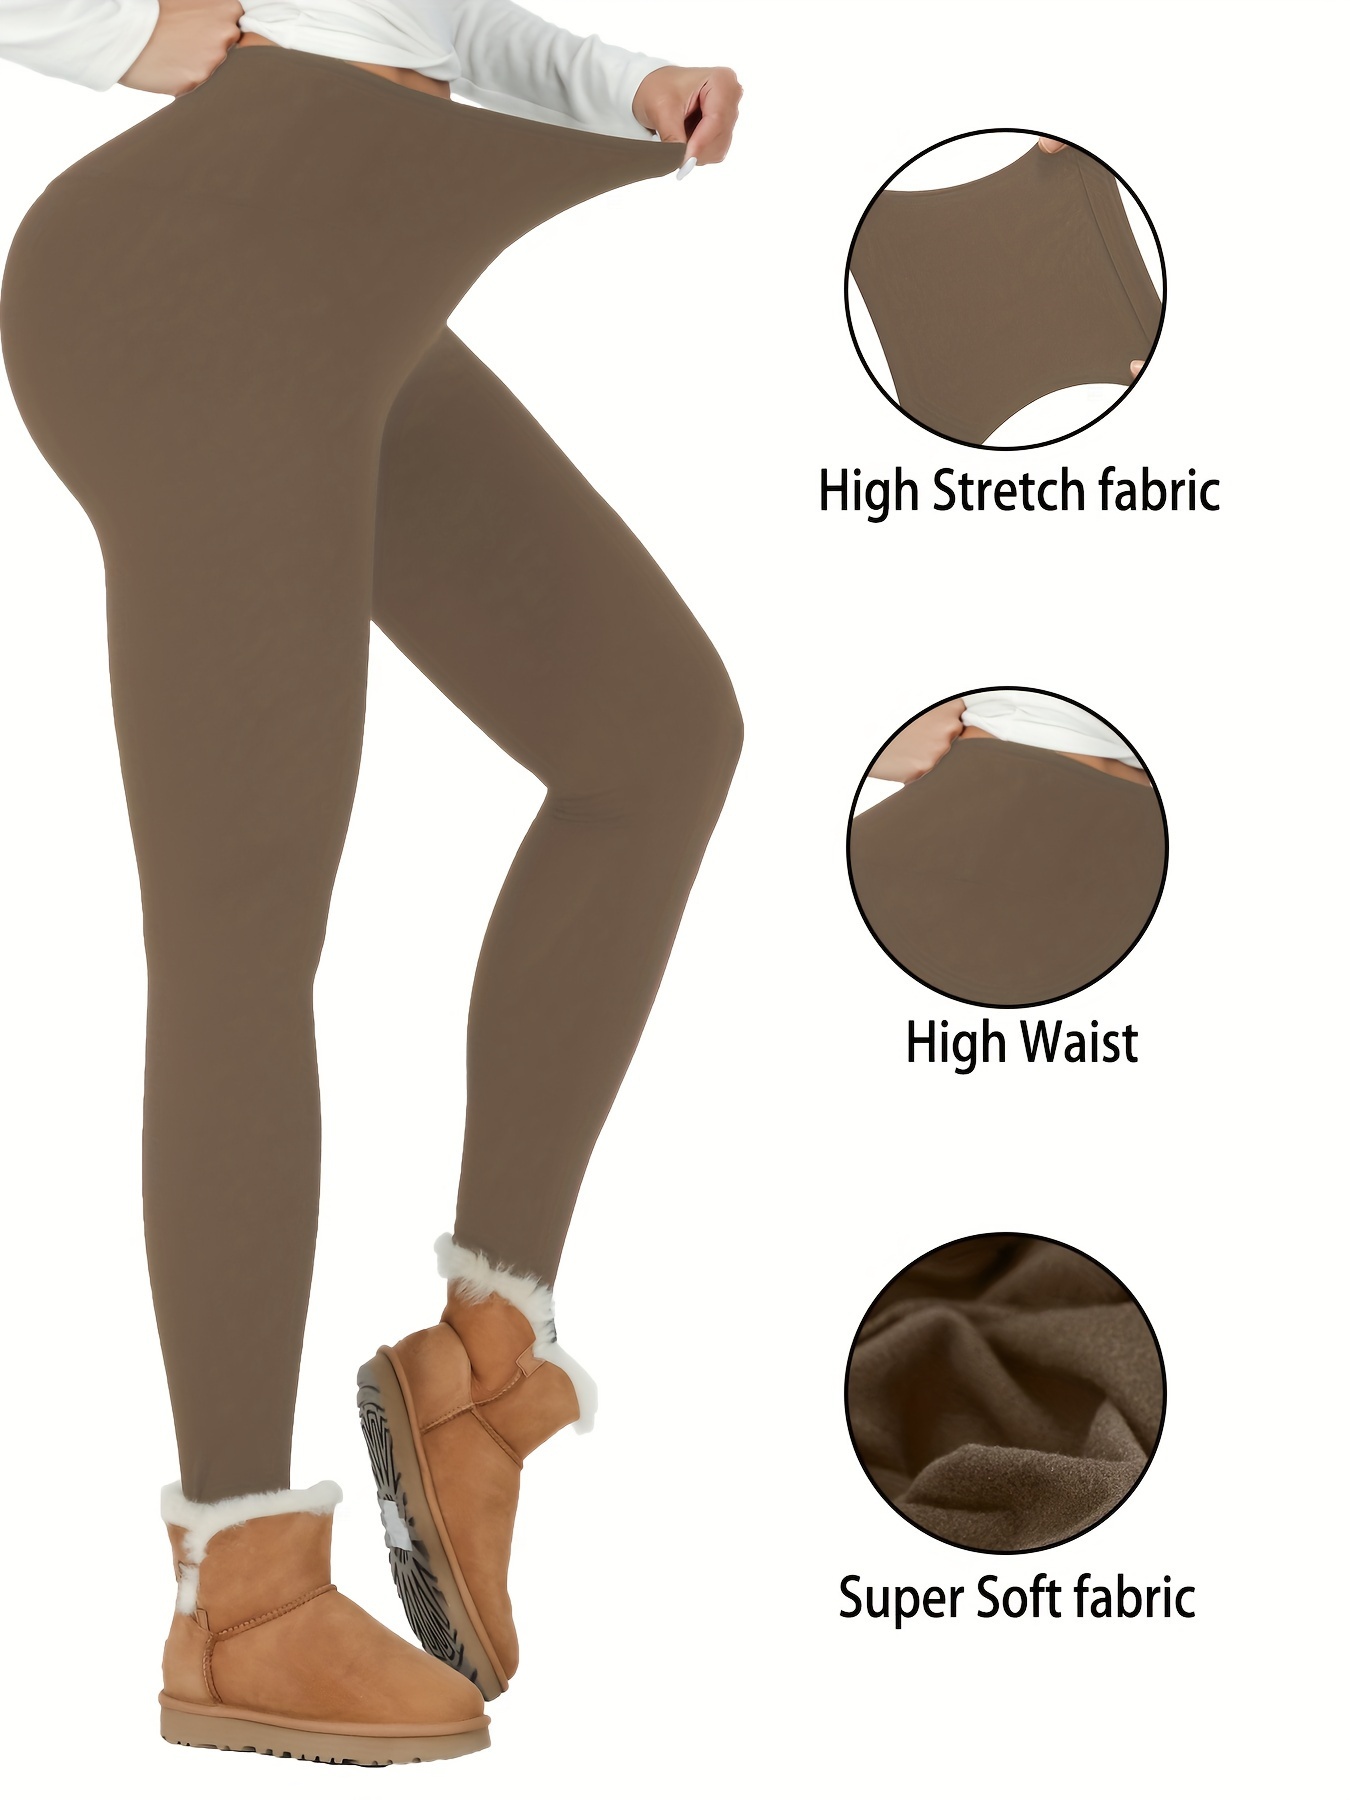 Plus Size Women Winter Warm Thick Leggings Fleece Lined Stretchy